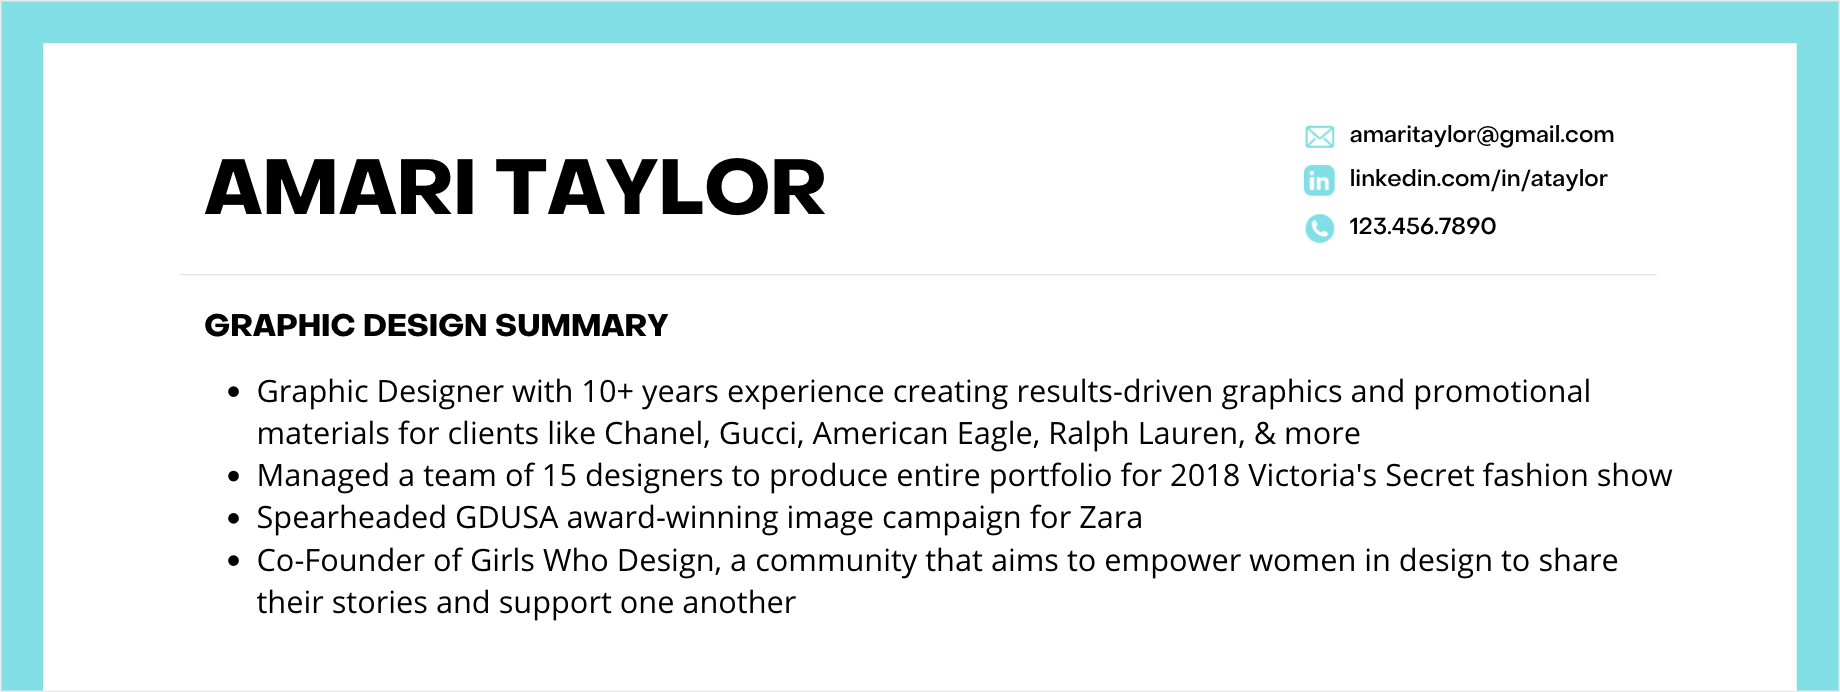 Example of Resume Summary for Graphic Designer